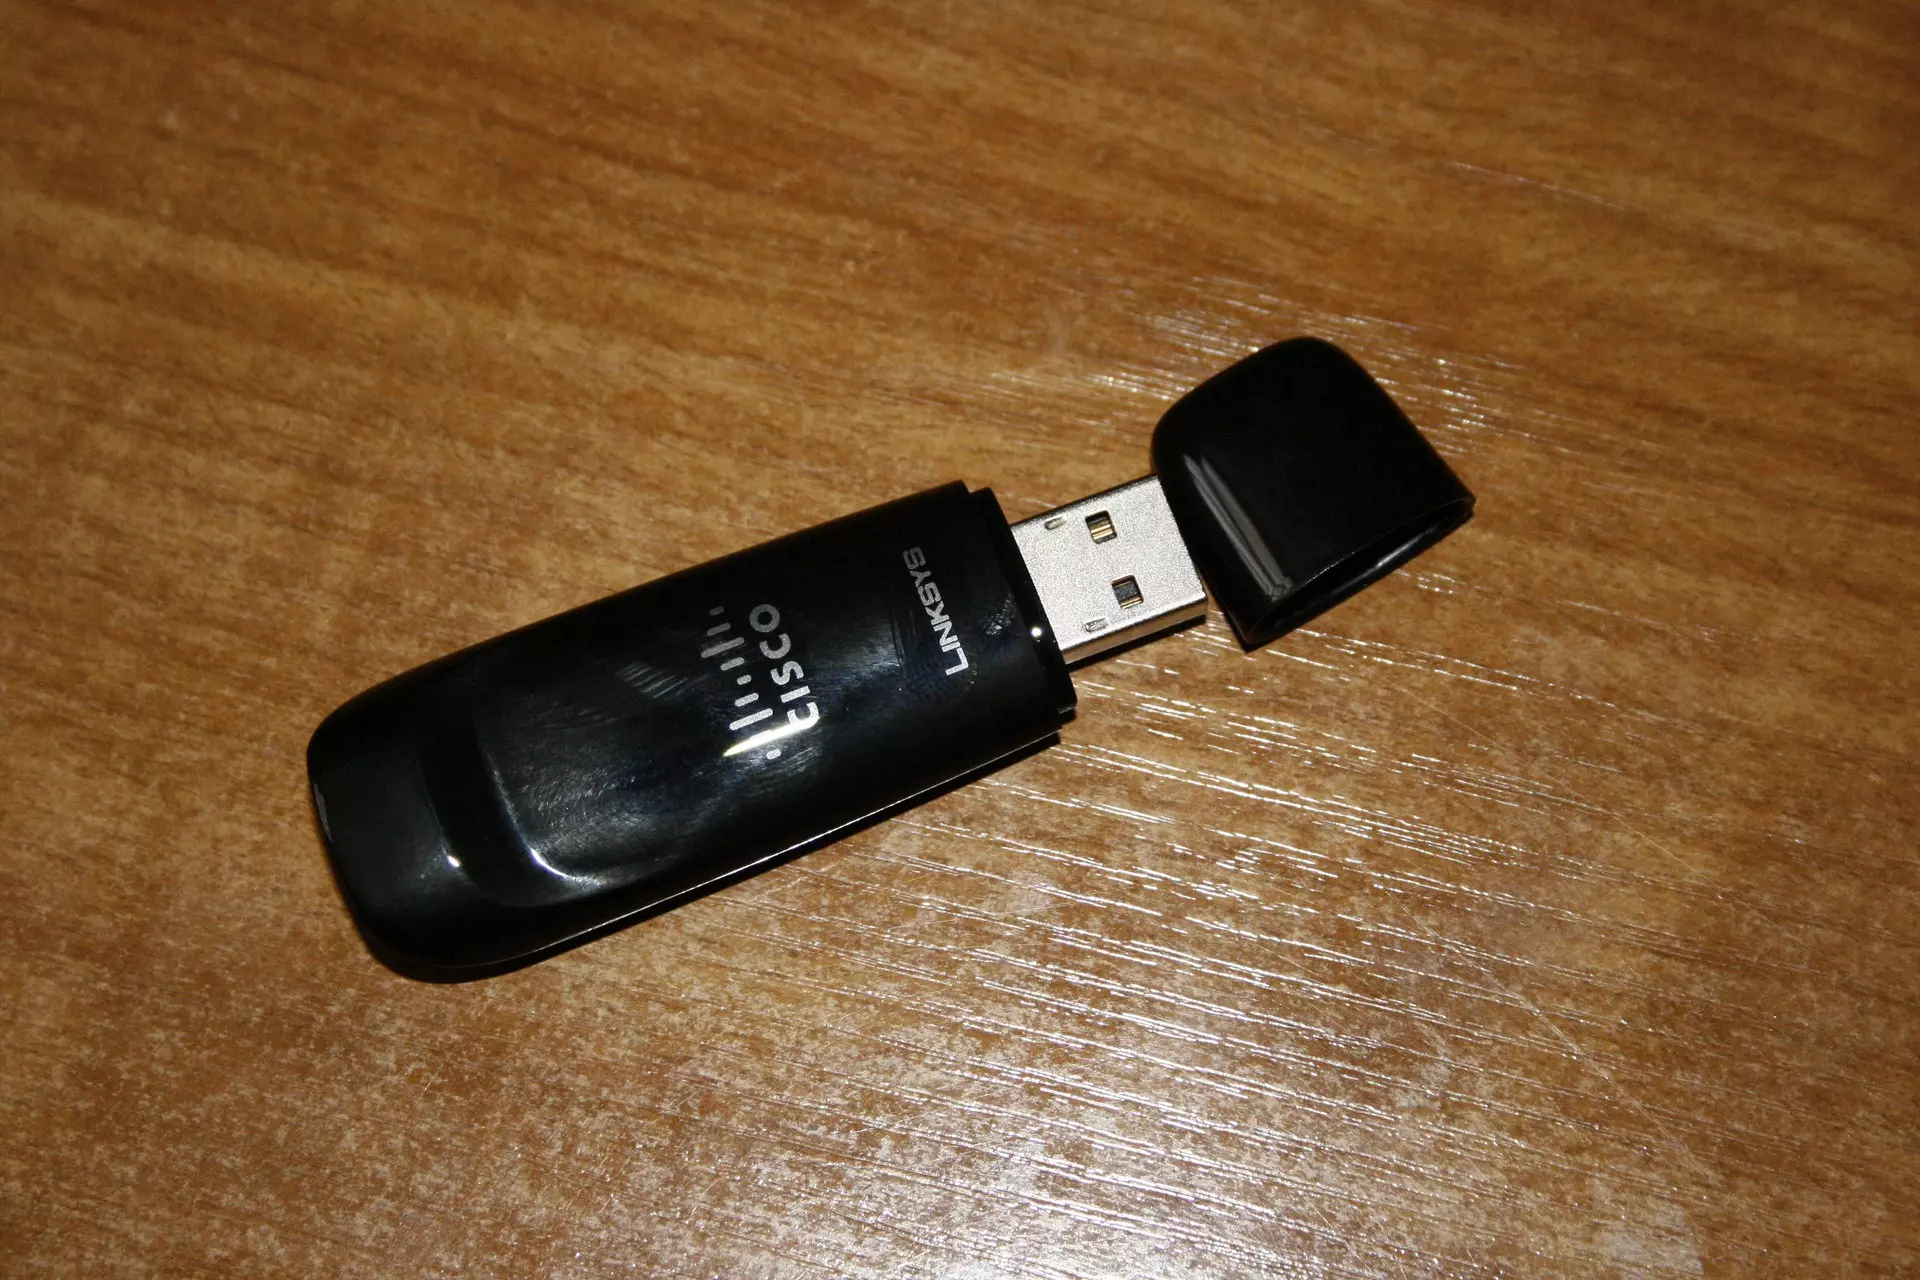 Linksys WUSB600N V2 without cap for USB connector